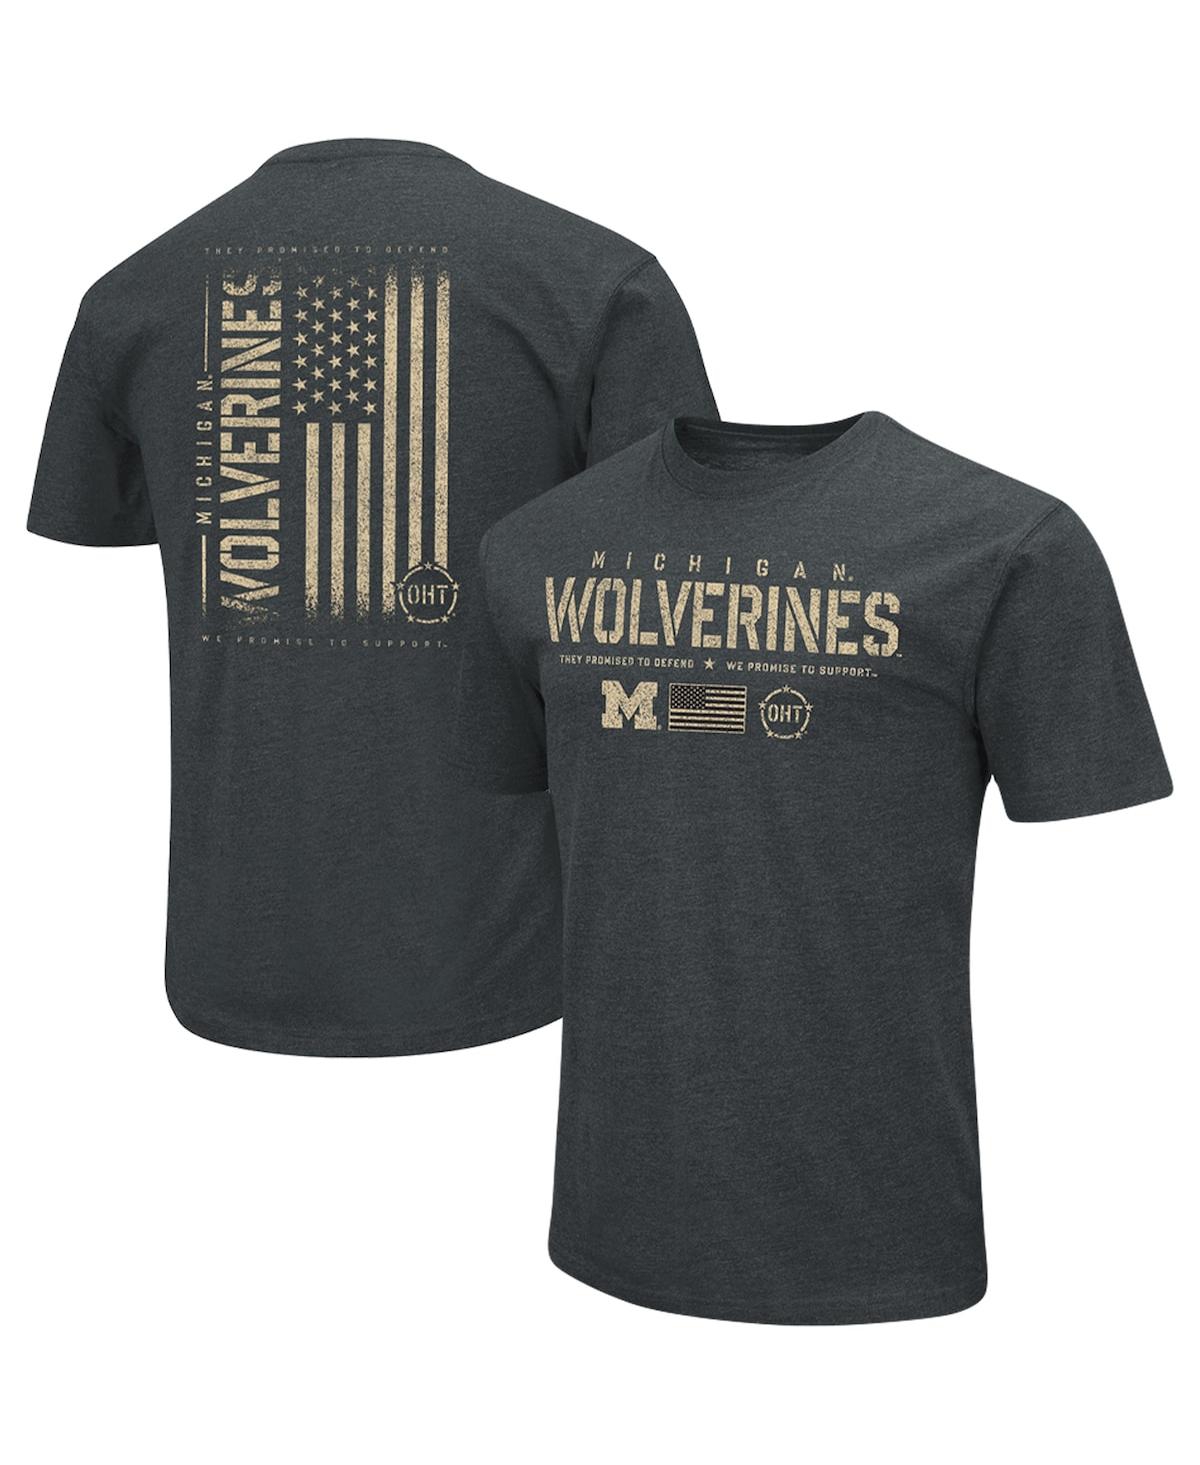 Men's Colosseum Heathered Black Michigan Wolverines Oht Military-Inspired Appreciation Flag 2.0 T-shirt - Heathered Black